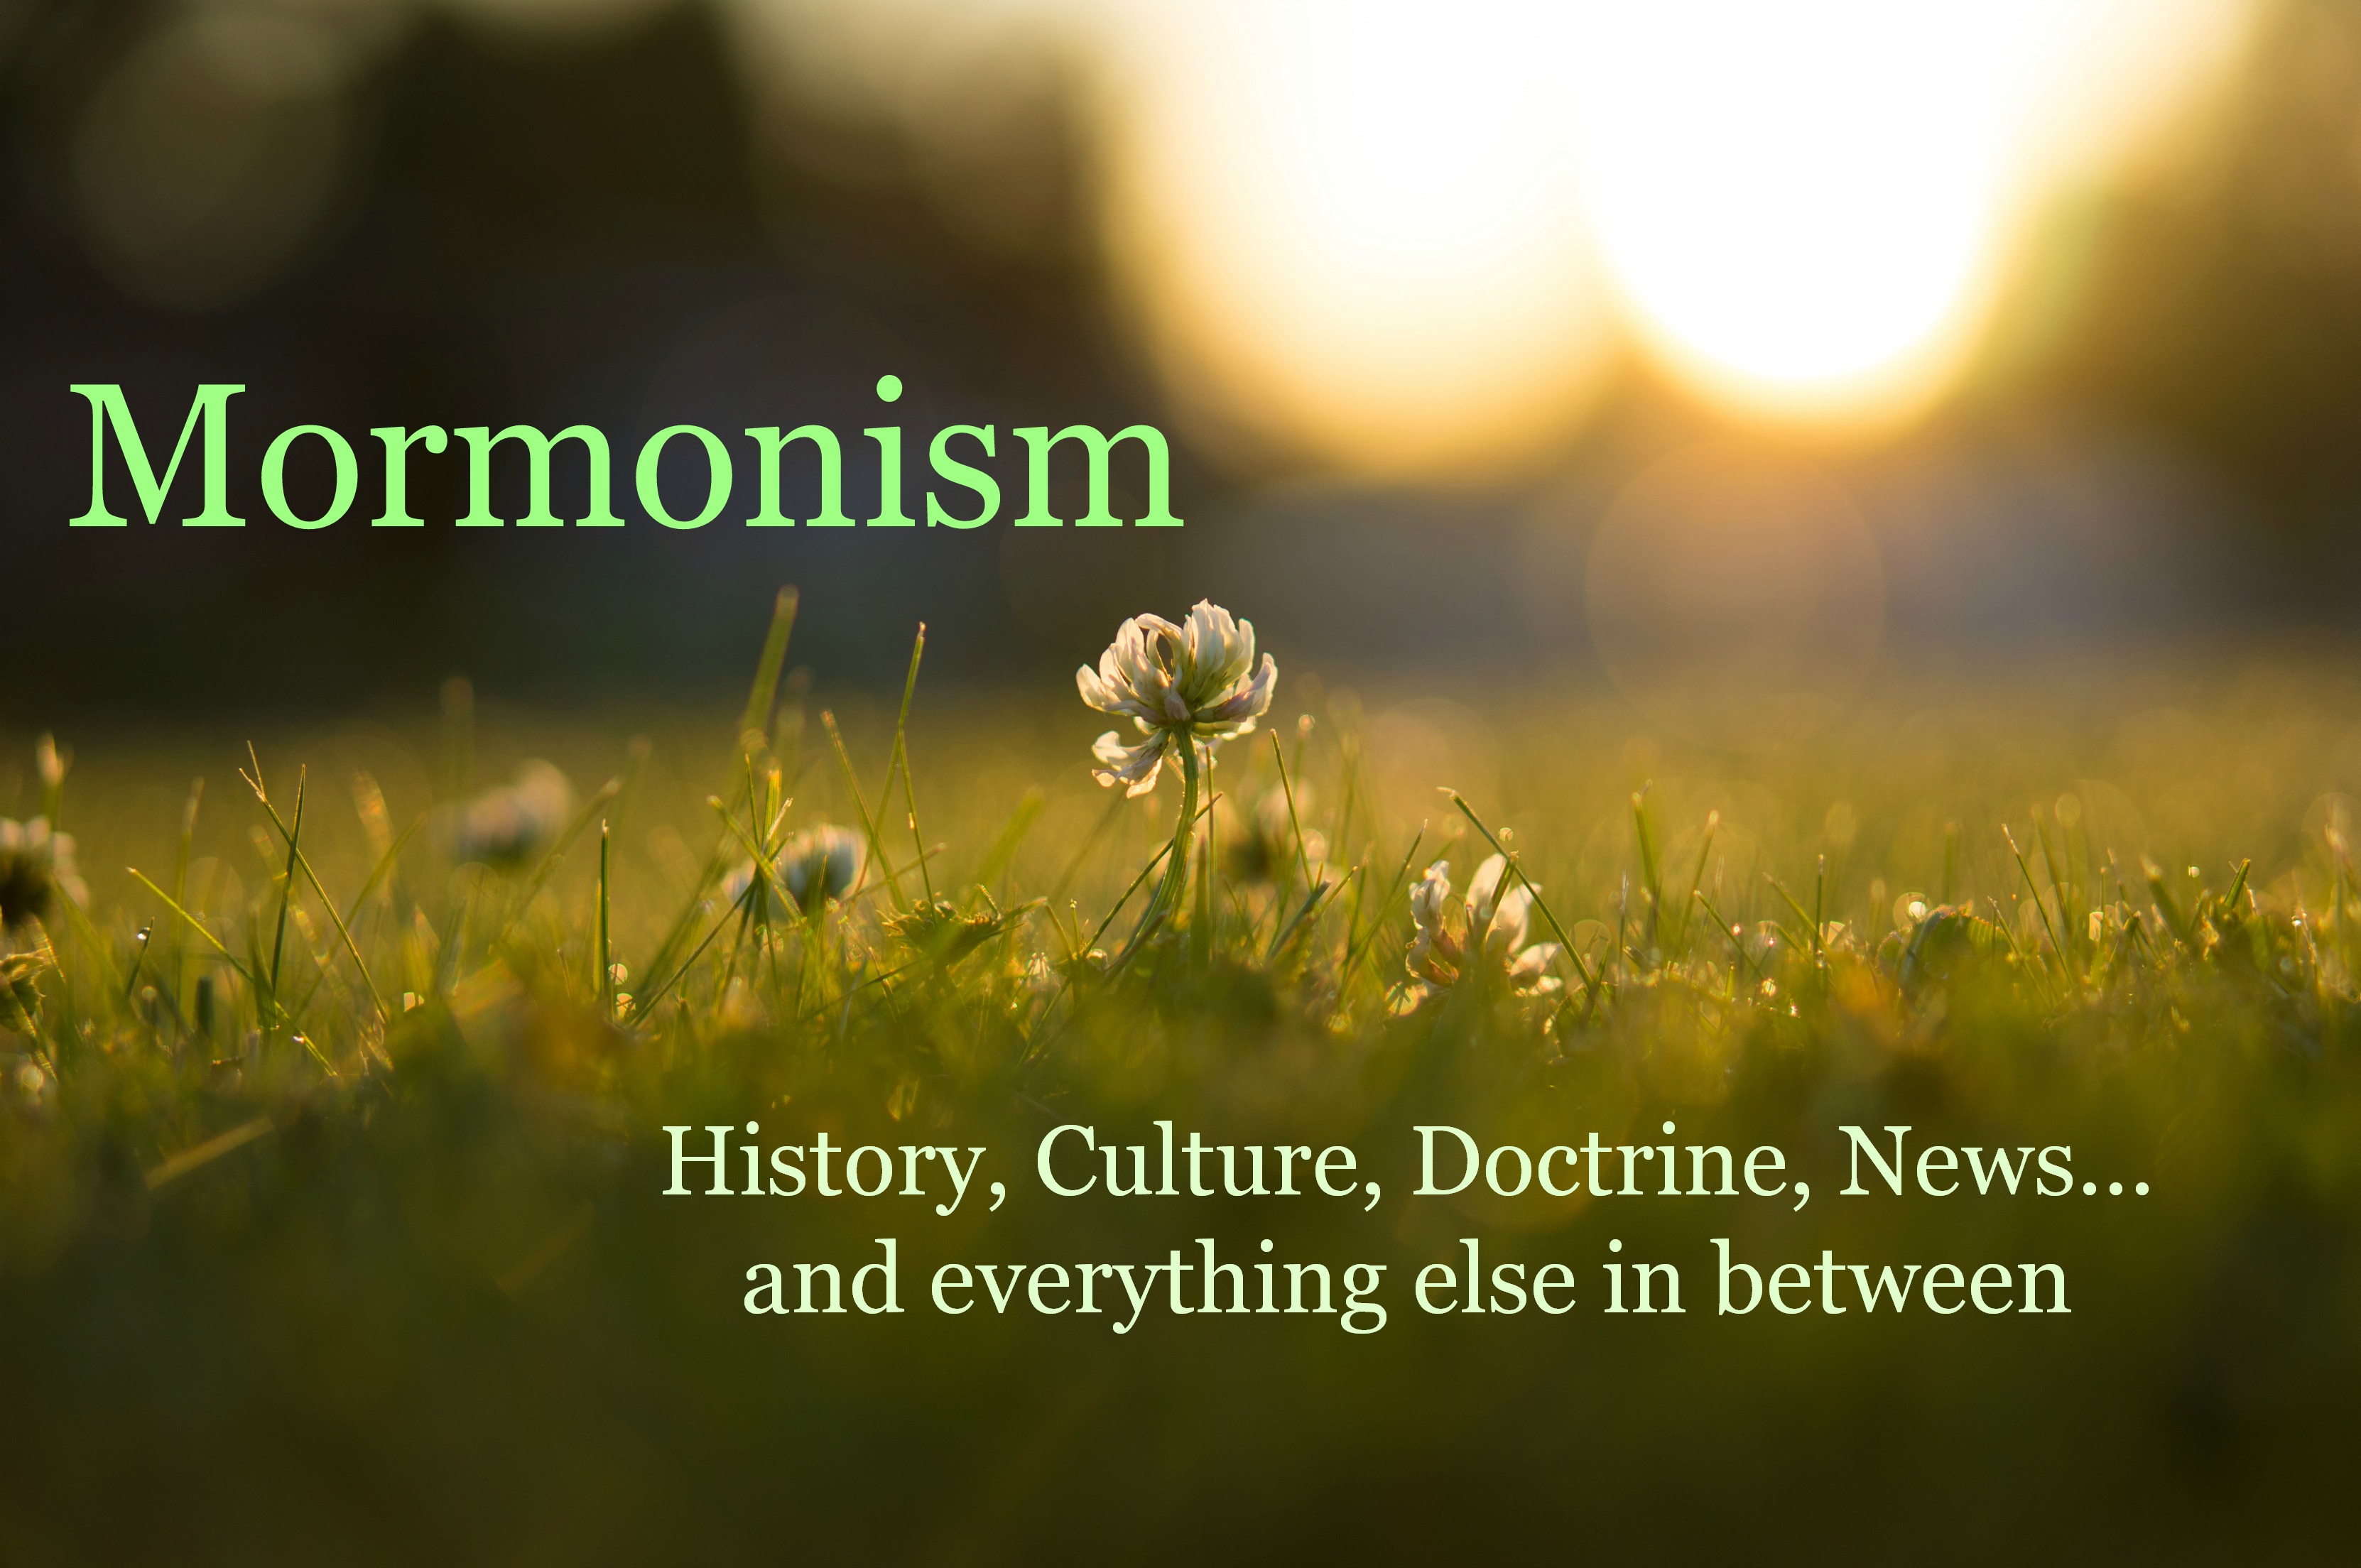    Mormonism To read more of Terrie’s articles, click the picture.